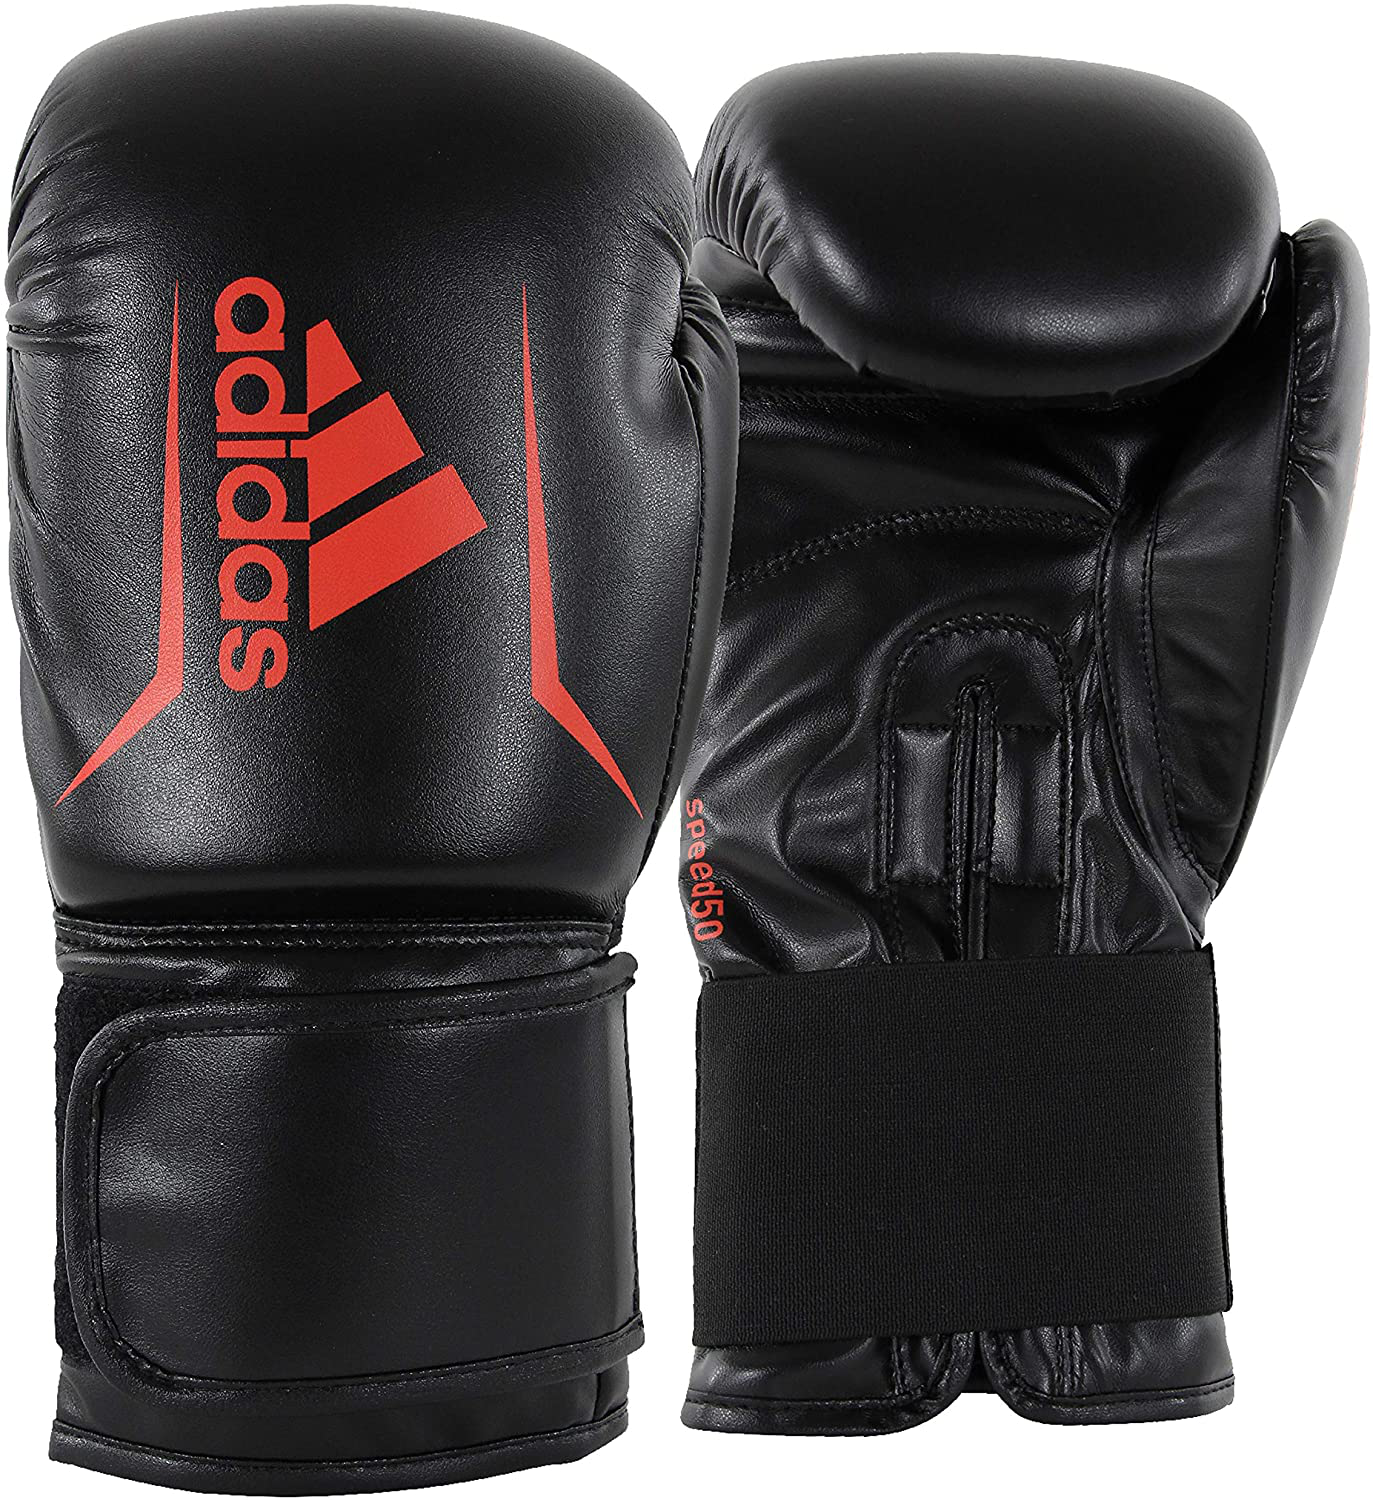 & FightersShop Speed Gloves — 3.0 50 Boxing Boxing Kickboxing Adidas for FLX Men/Wome